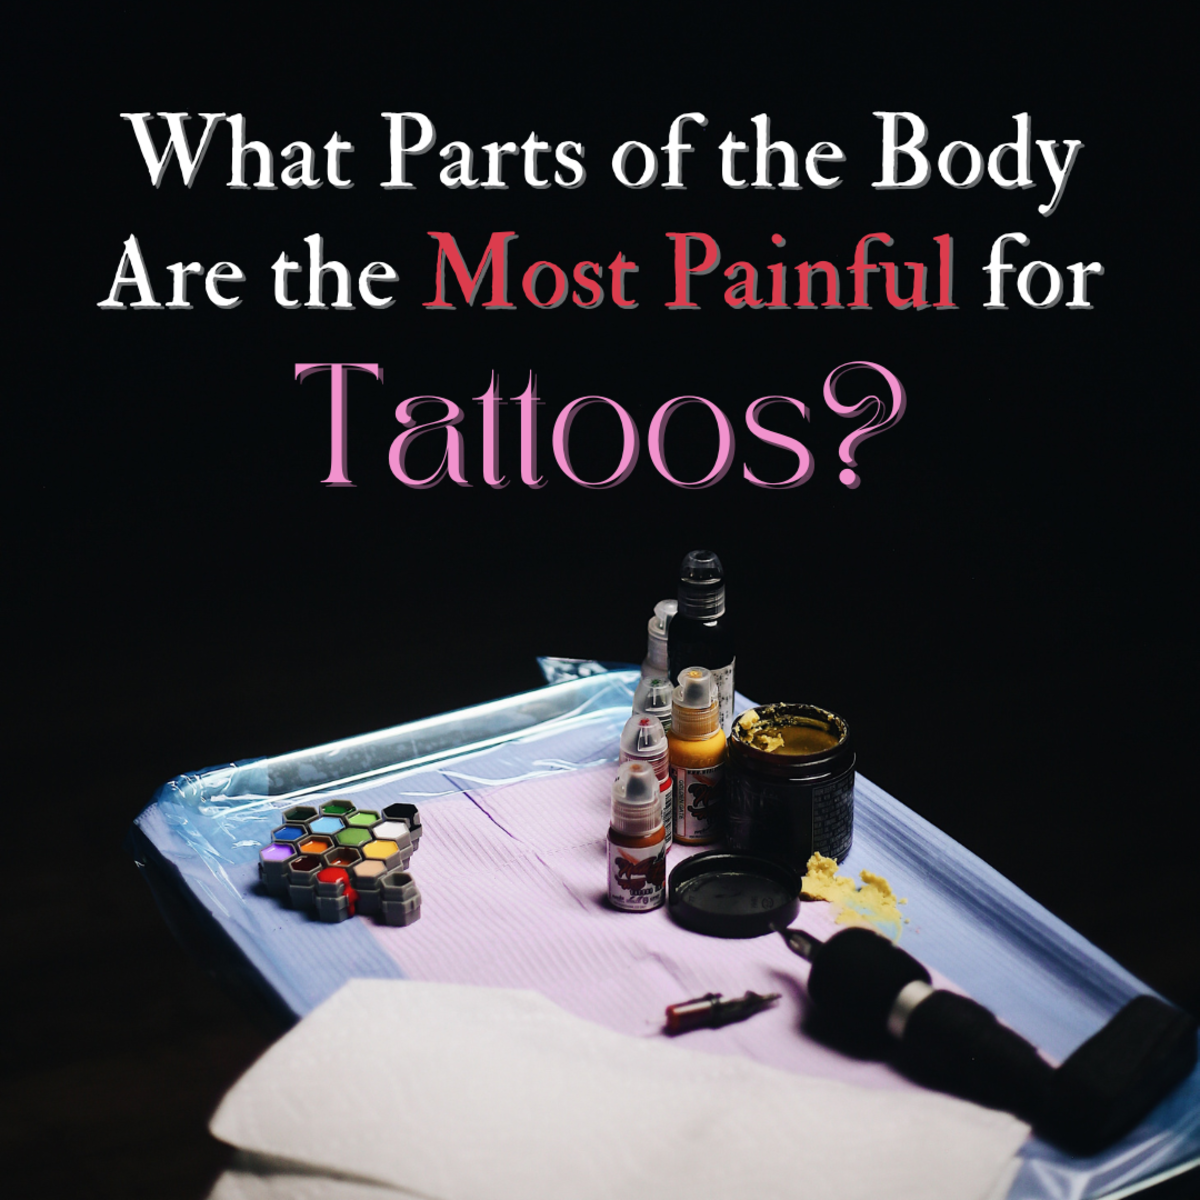 The Most Painful Zones of the Body for a Tattoo